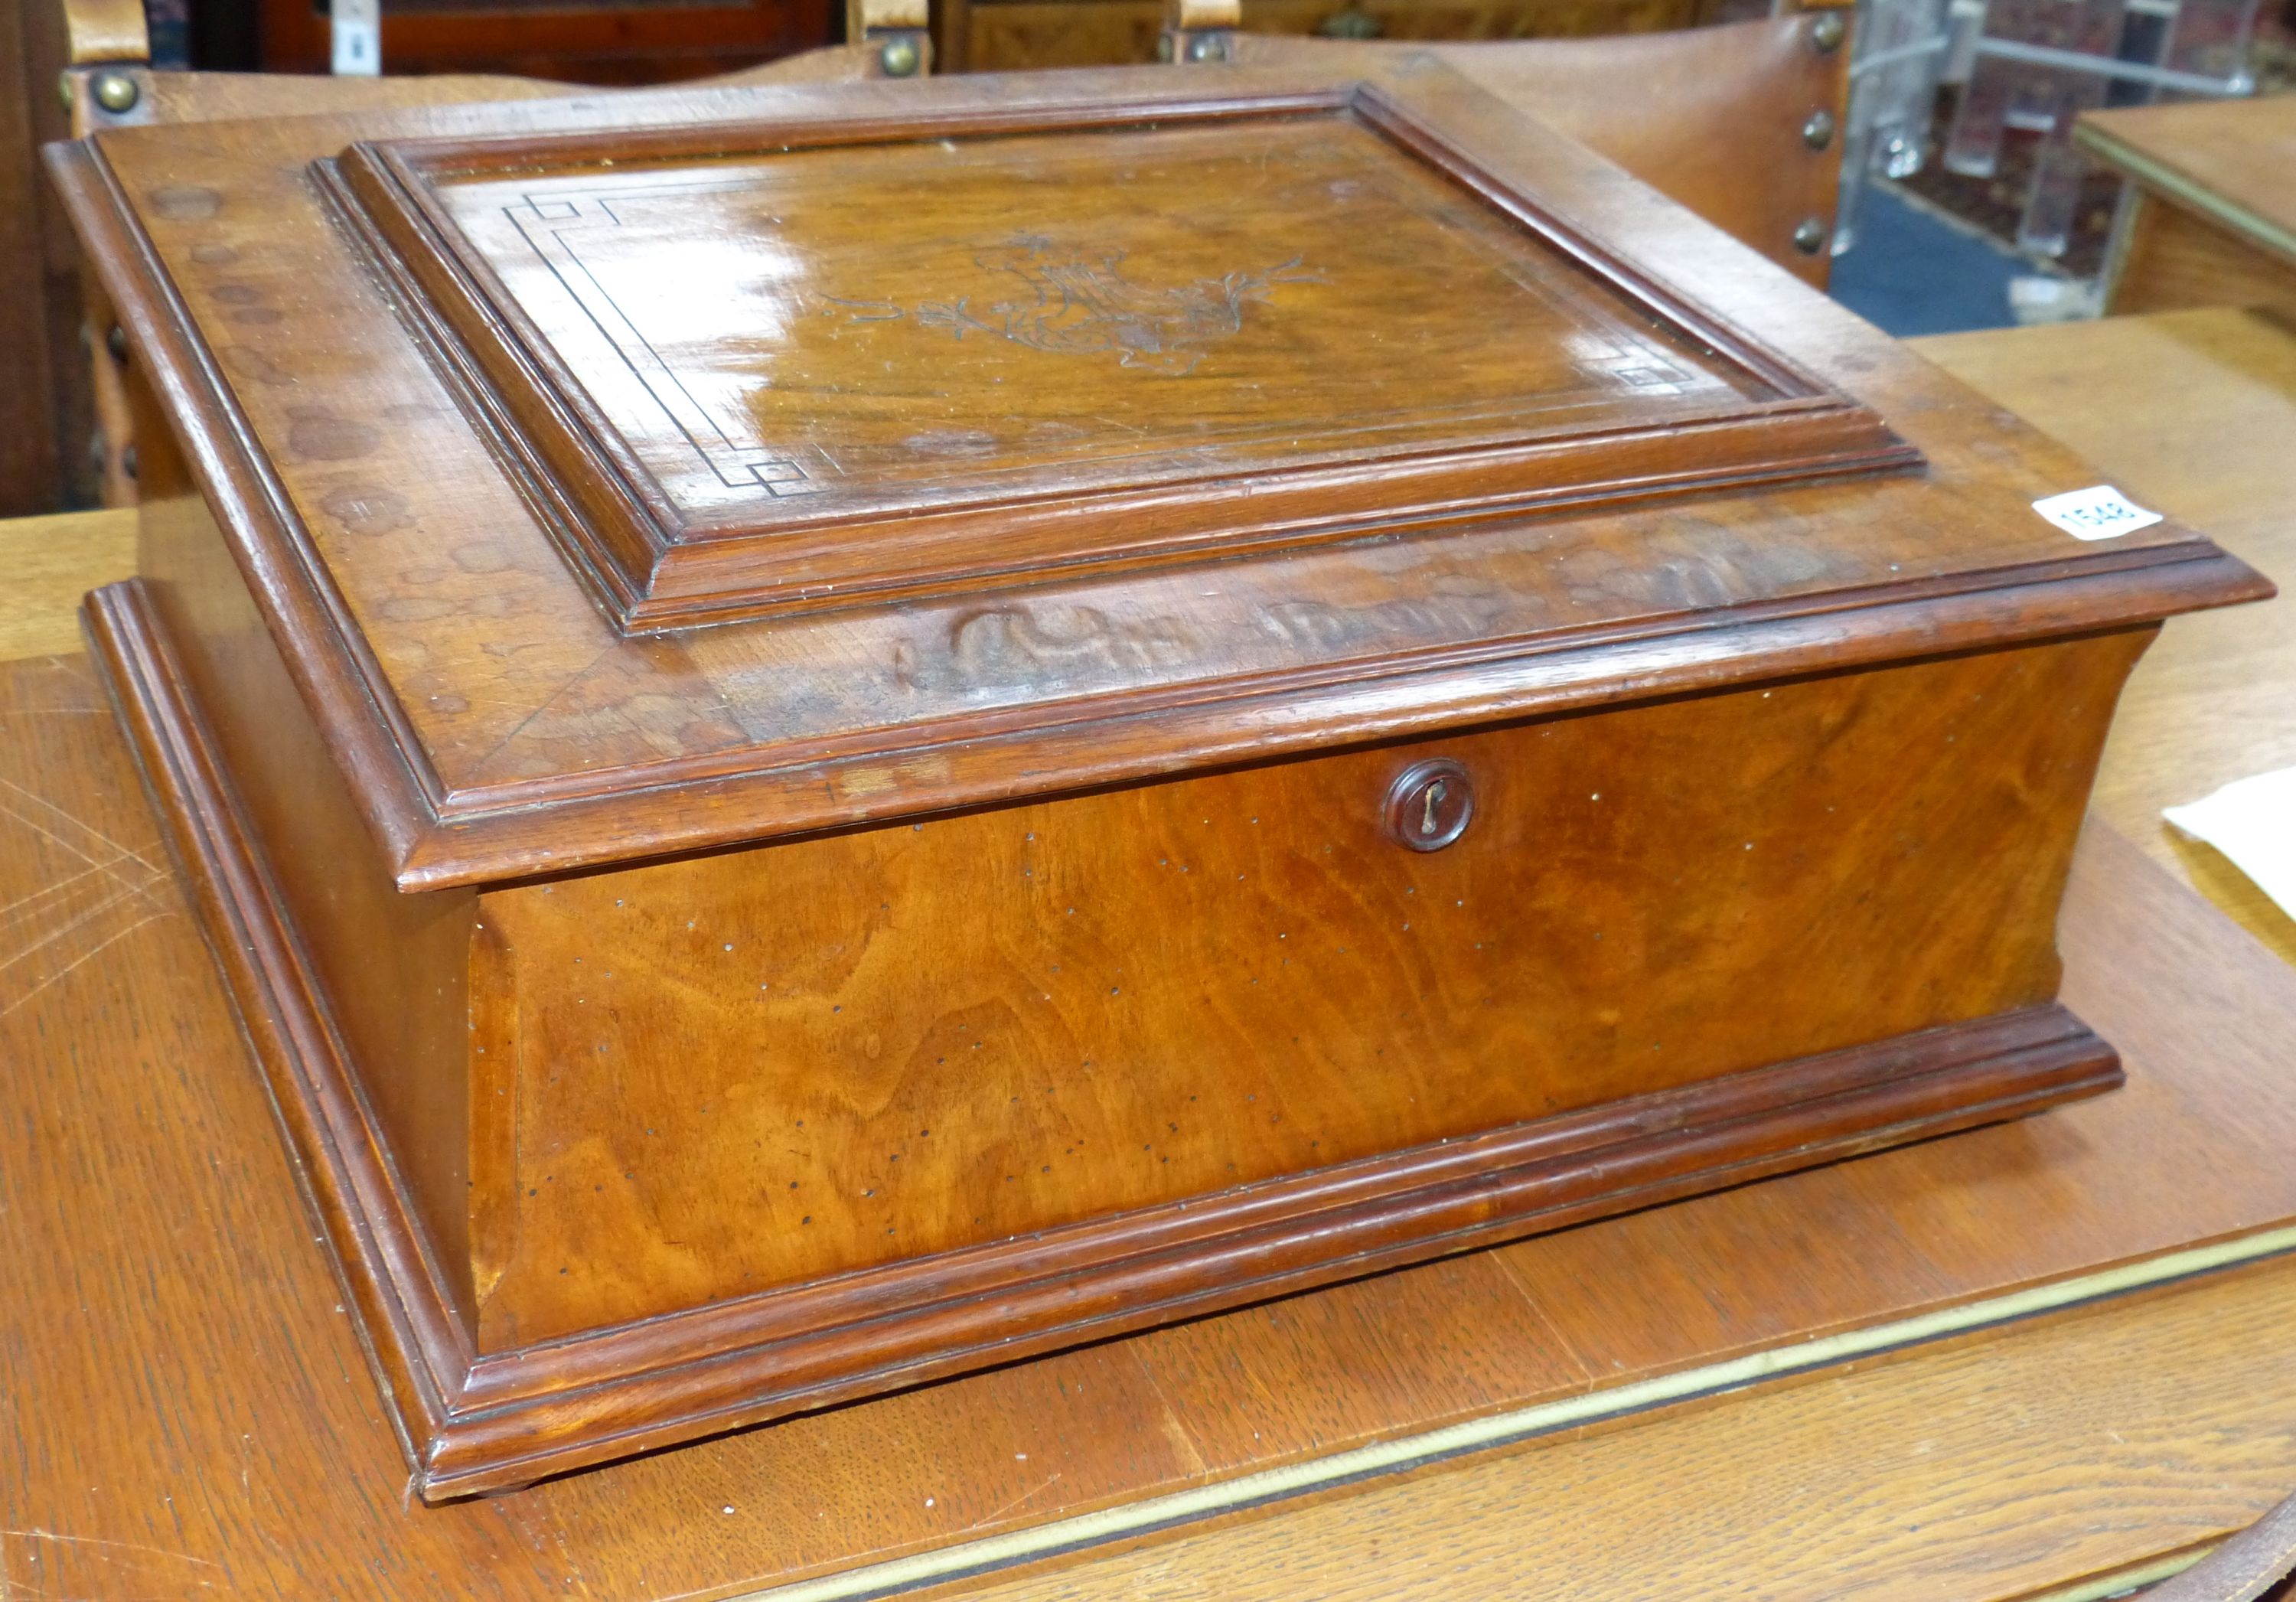 A large Polyphon walnut table top musical box, playing thirty 39.5cm discs